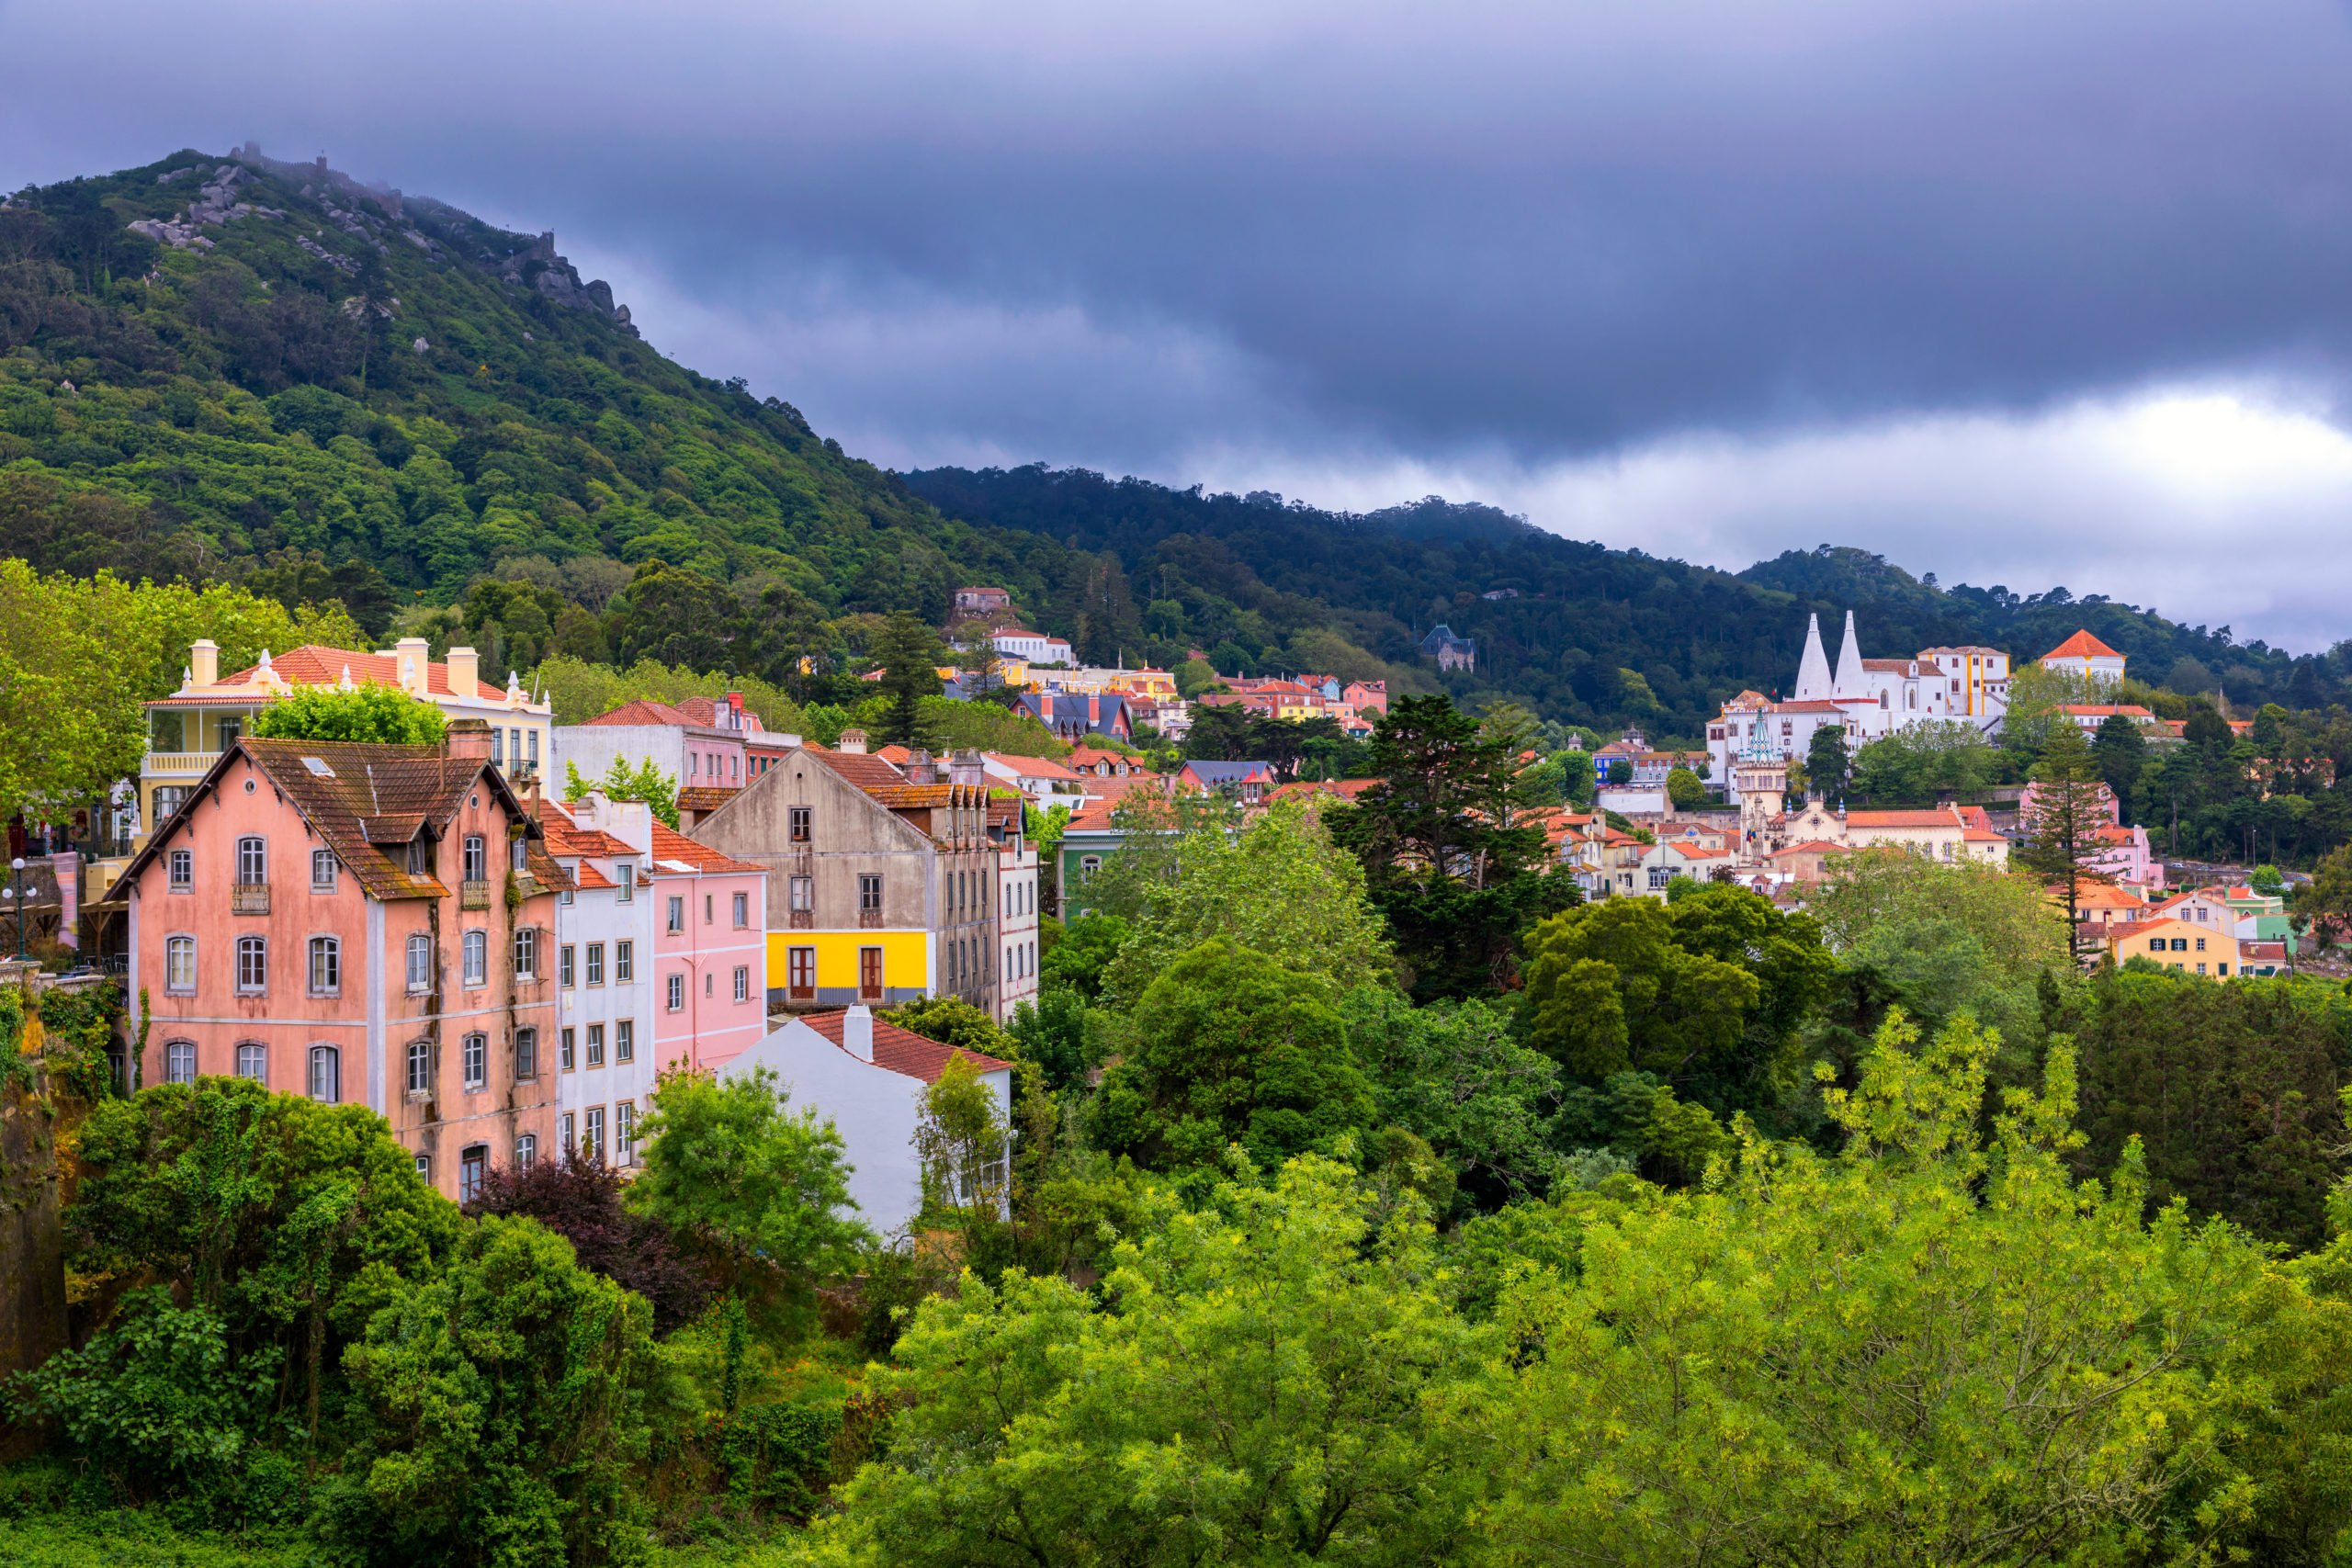 Discover The Unseco World Heritage Of Sintra On The Sintra, Pena Palace, Cascais & Estoril Half Day Tour From Lisbon